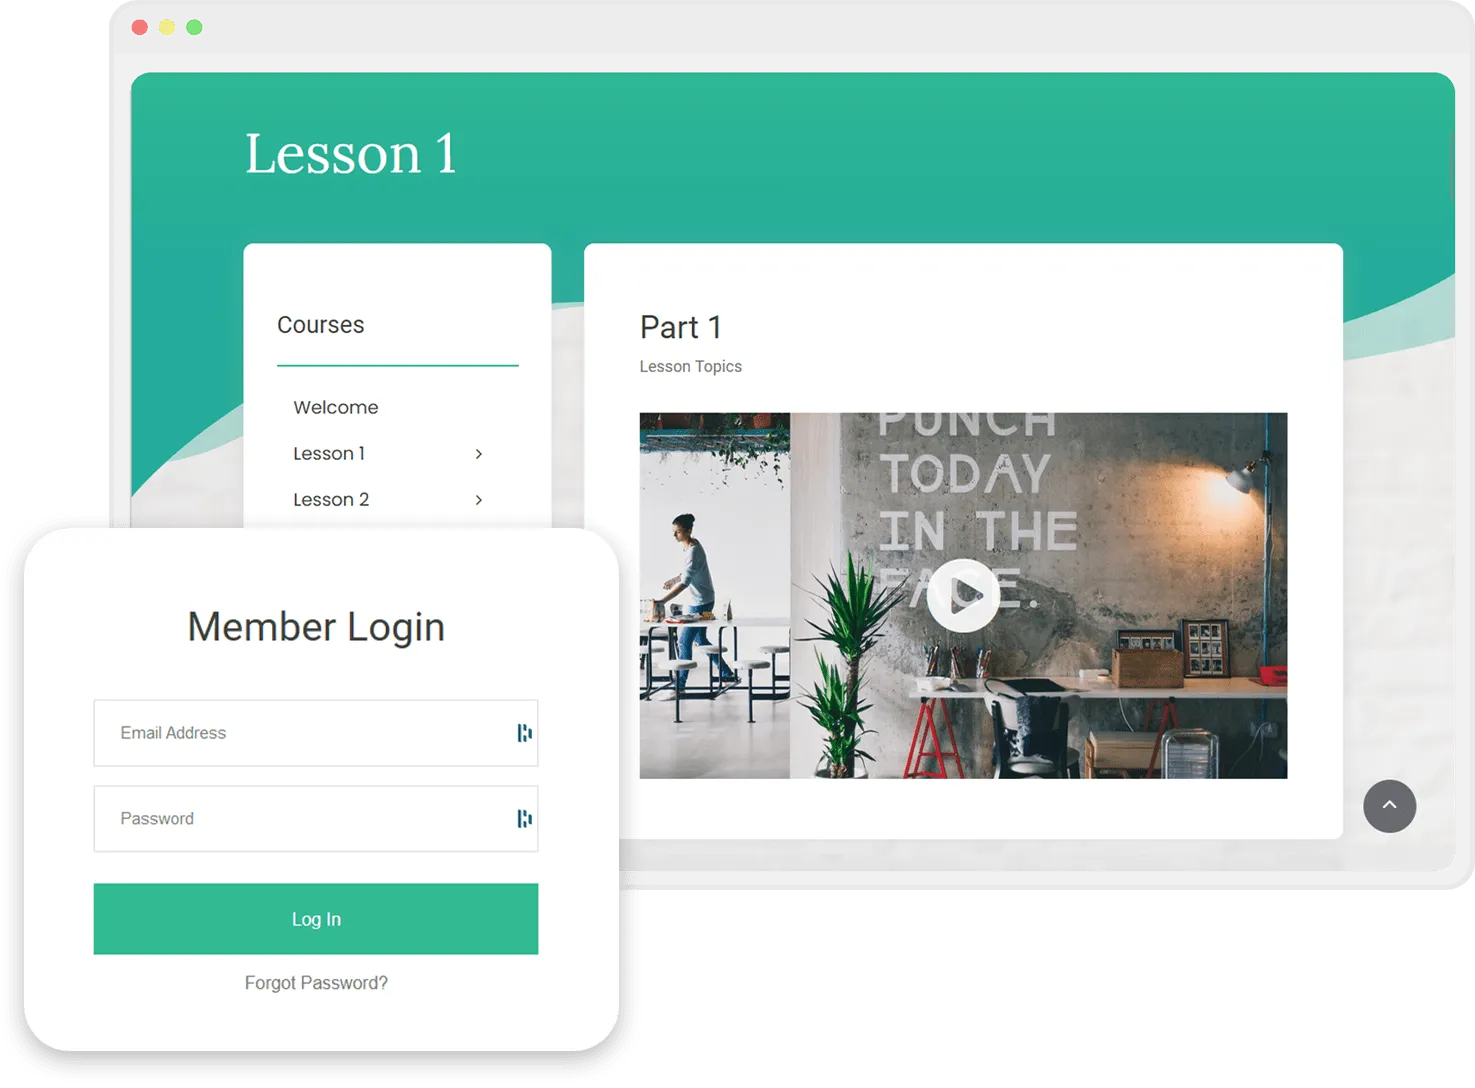 Screenshot of an online course interface showing 'Lesson 1', a sidebar with course navigation, and a member login prompt.